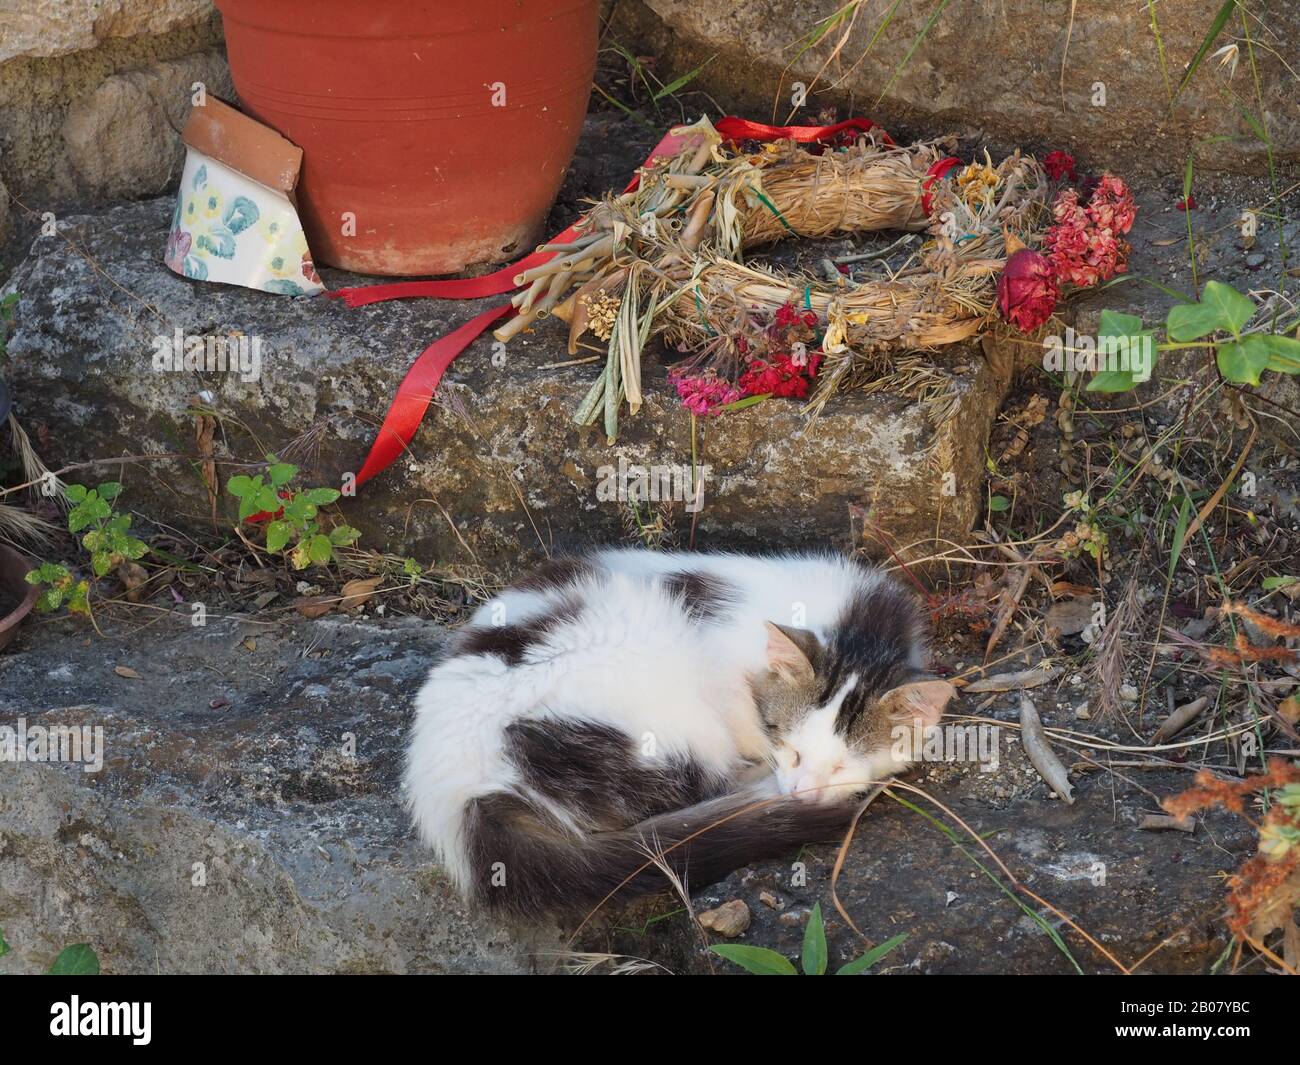 Sleeping cat curled up beneath straw and flower wreath and plant pot Stock Photo